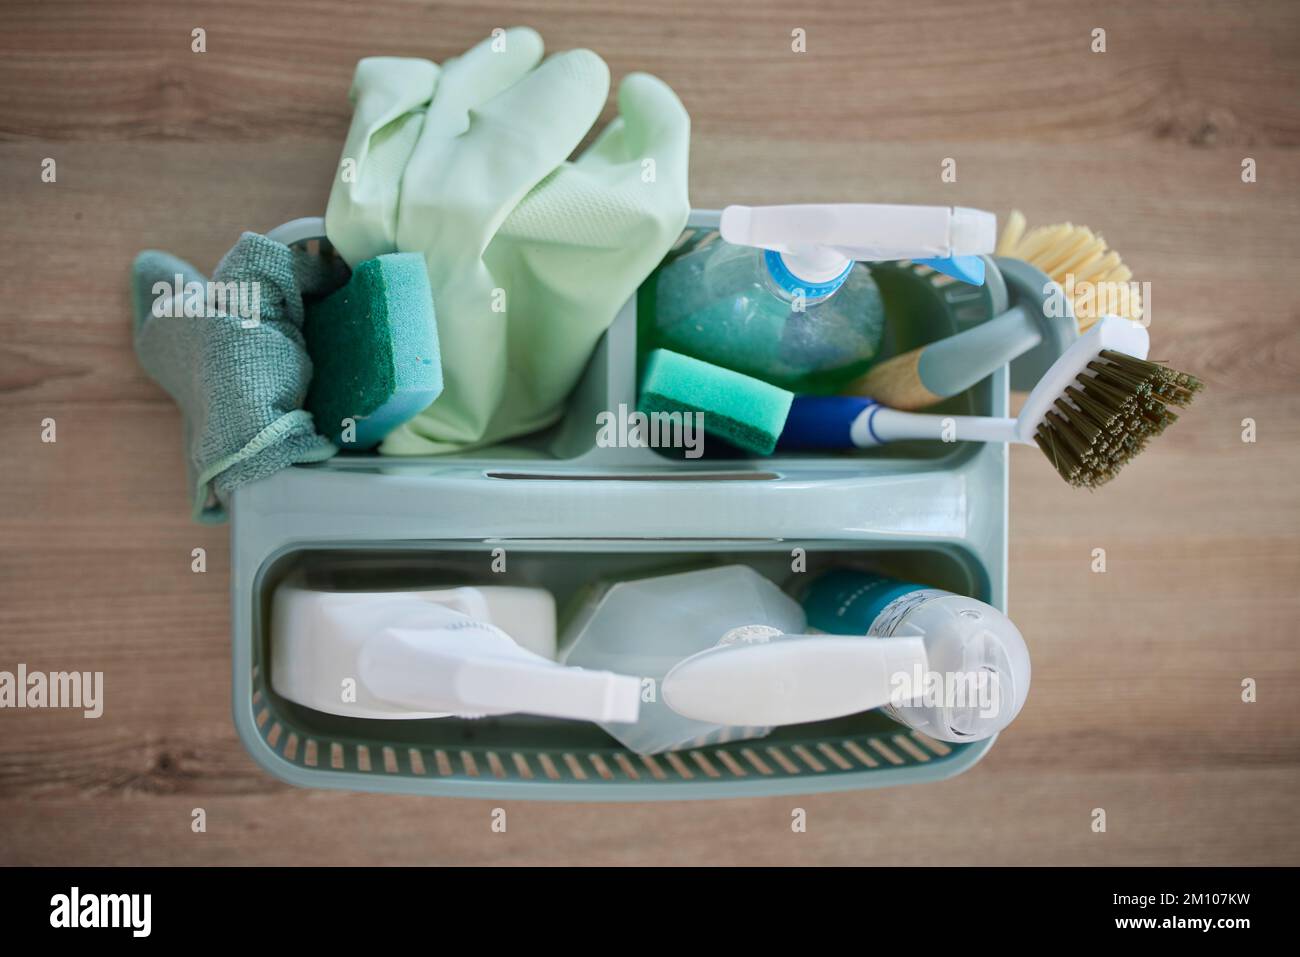 https://c8.alamy.com/comp/2M107KW/top-view-of-cleaning-products-and-basket-on-table-in-home-living-room-for-hygiene-spring-cleaning-health-or-housekeeping-equipment-tools-or-2M107KW.jpg